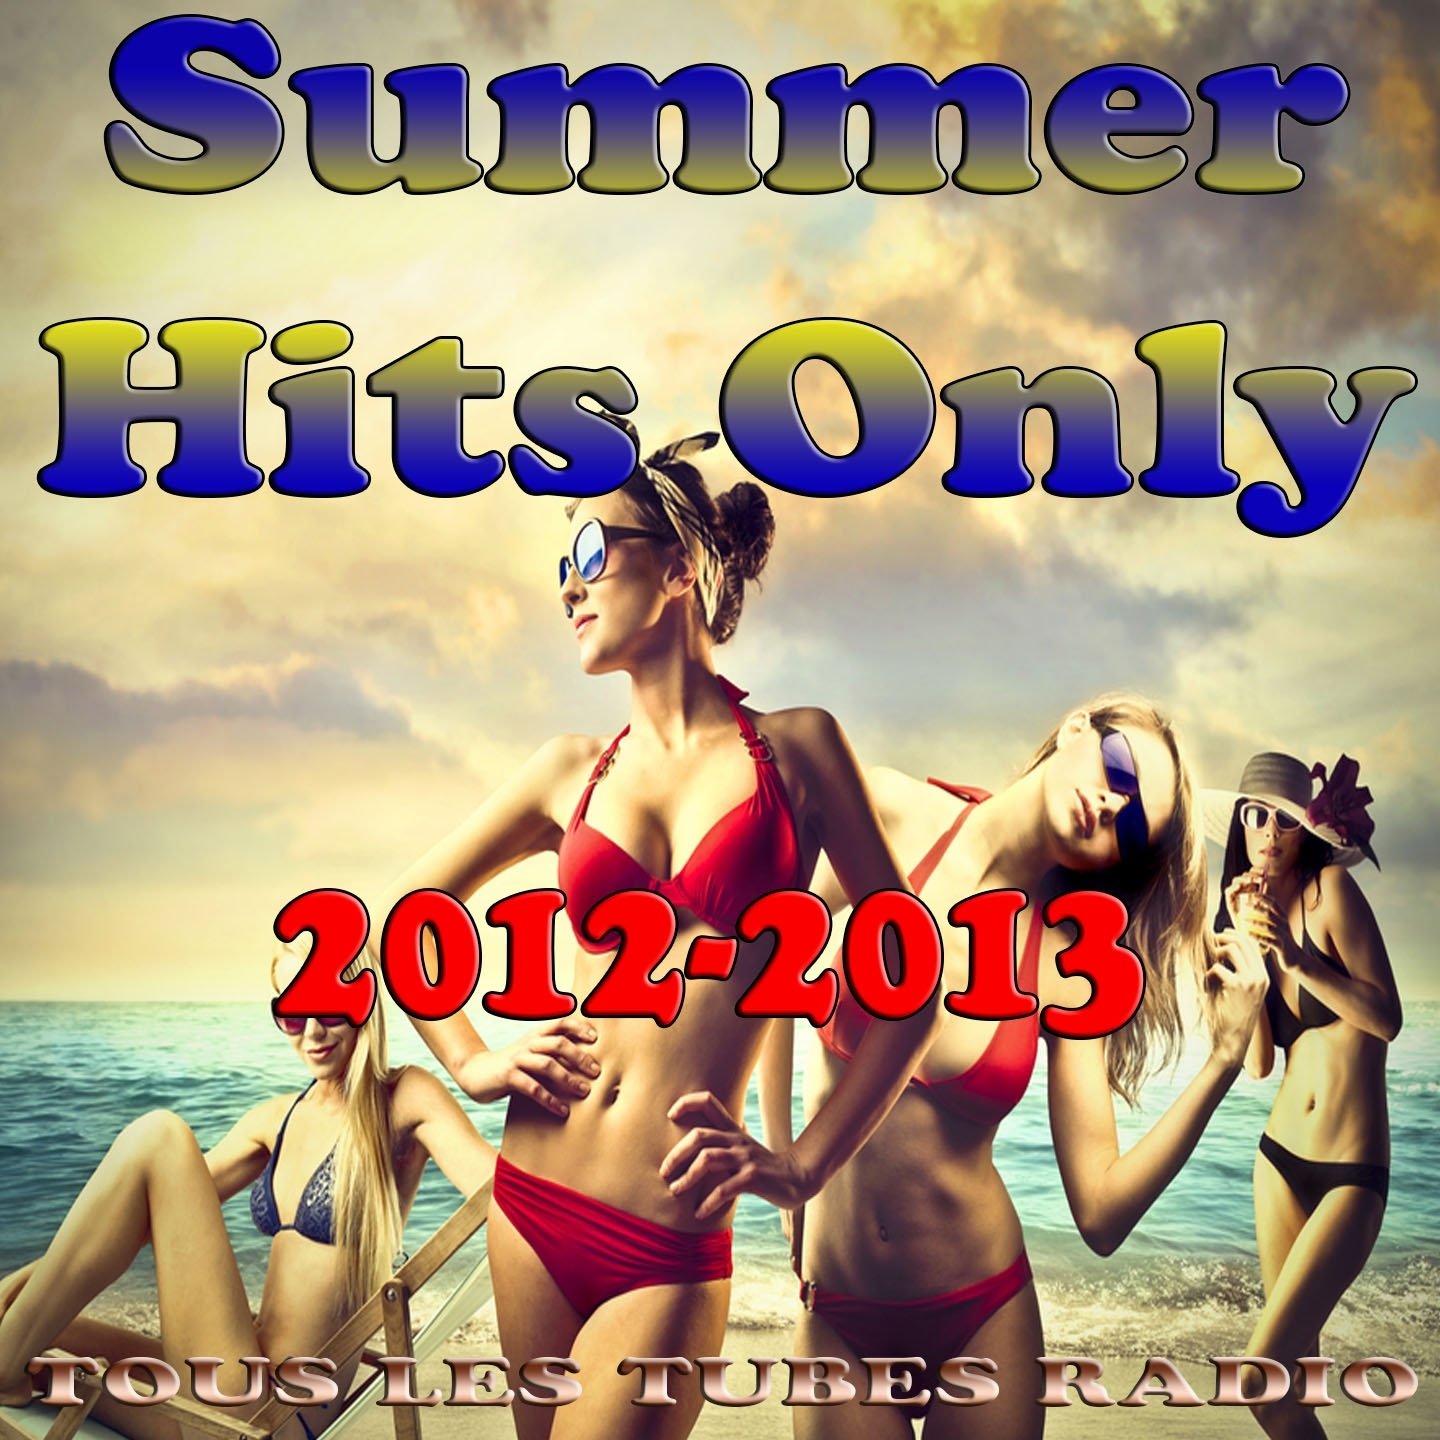 Only Hits альбом. Various artists 2013. Песня Summer Hits. Only hits